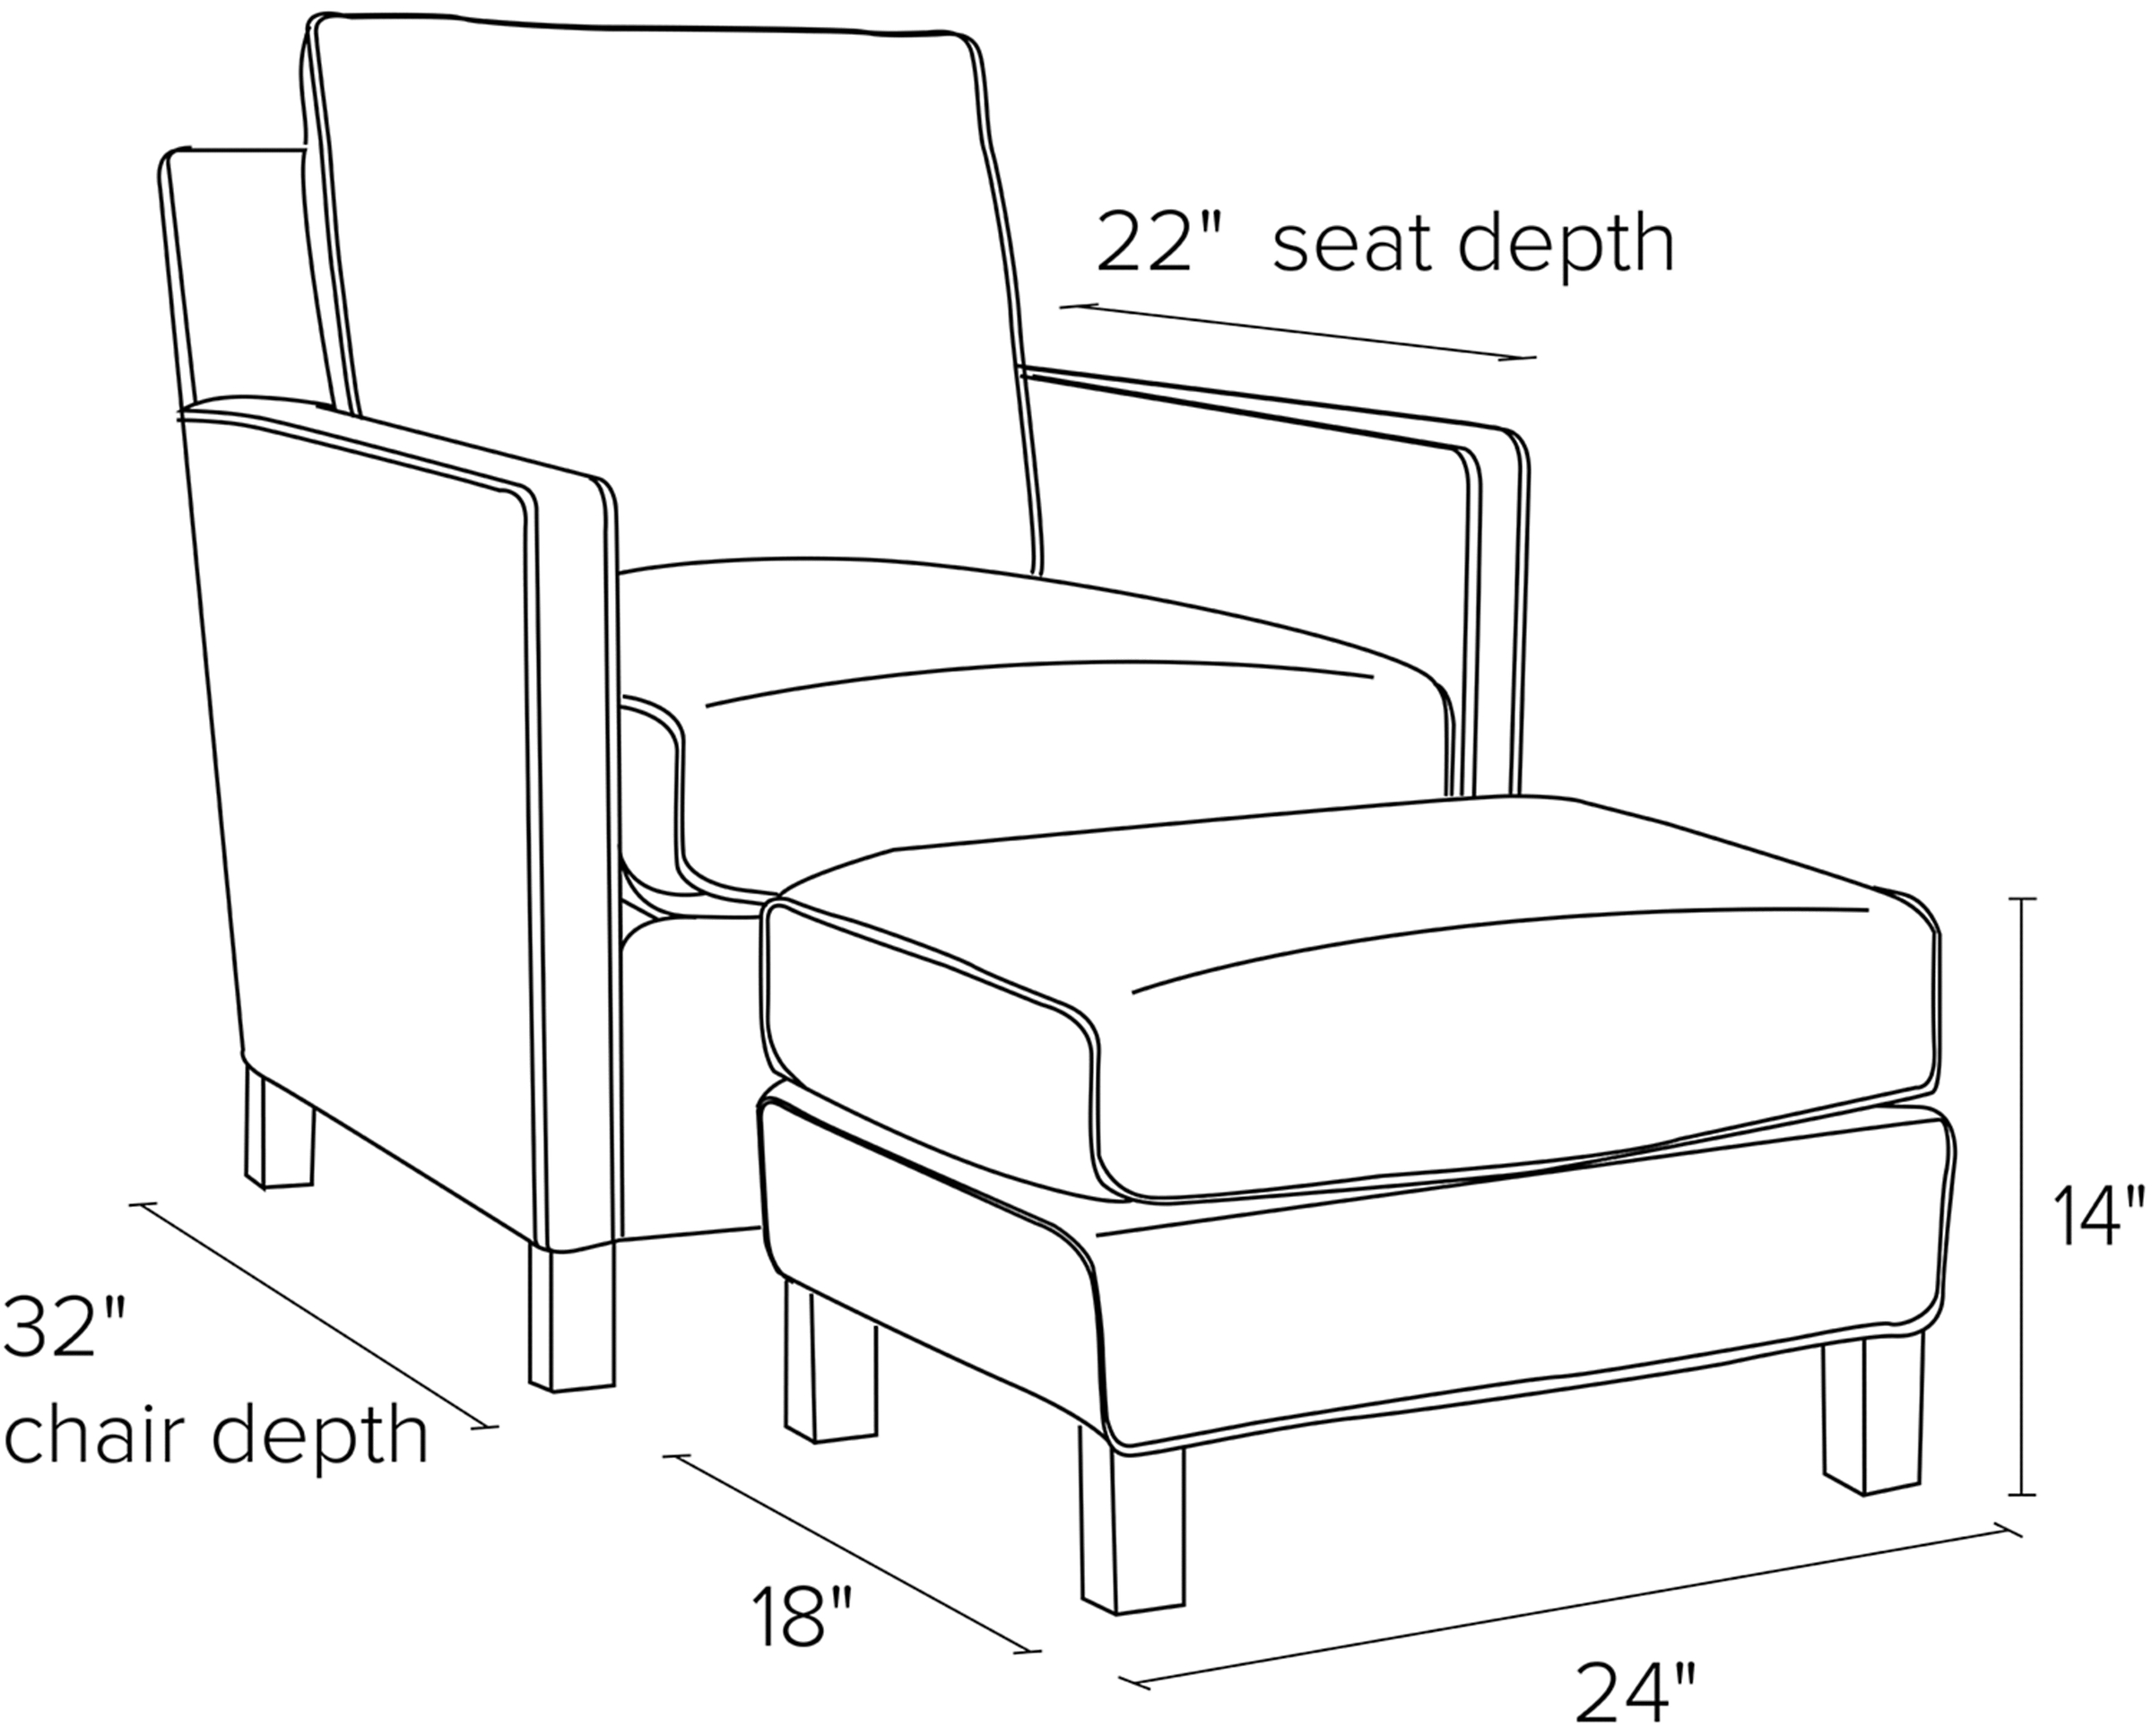 Side view dimension illustration of Bram chair.